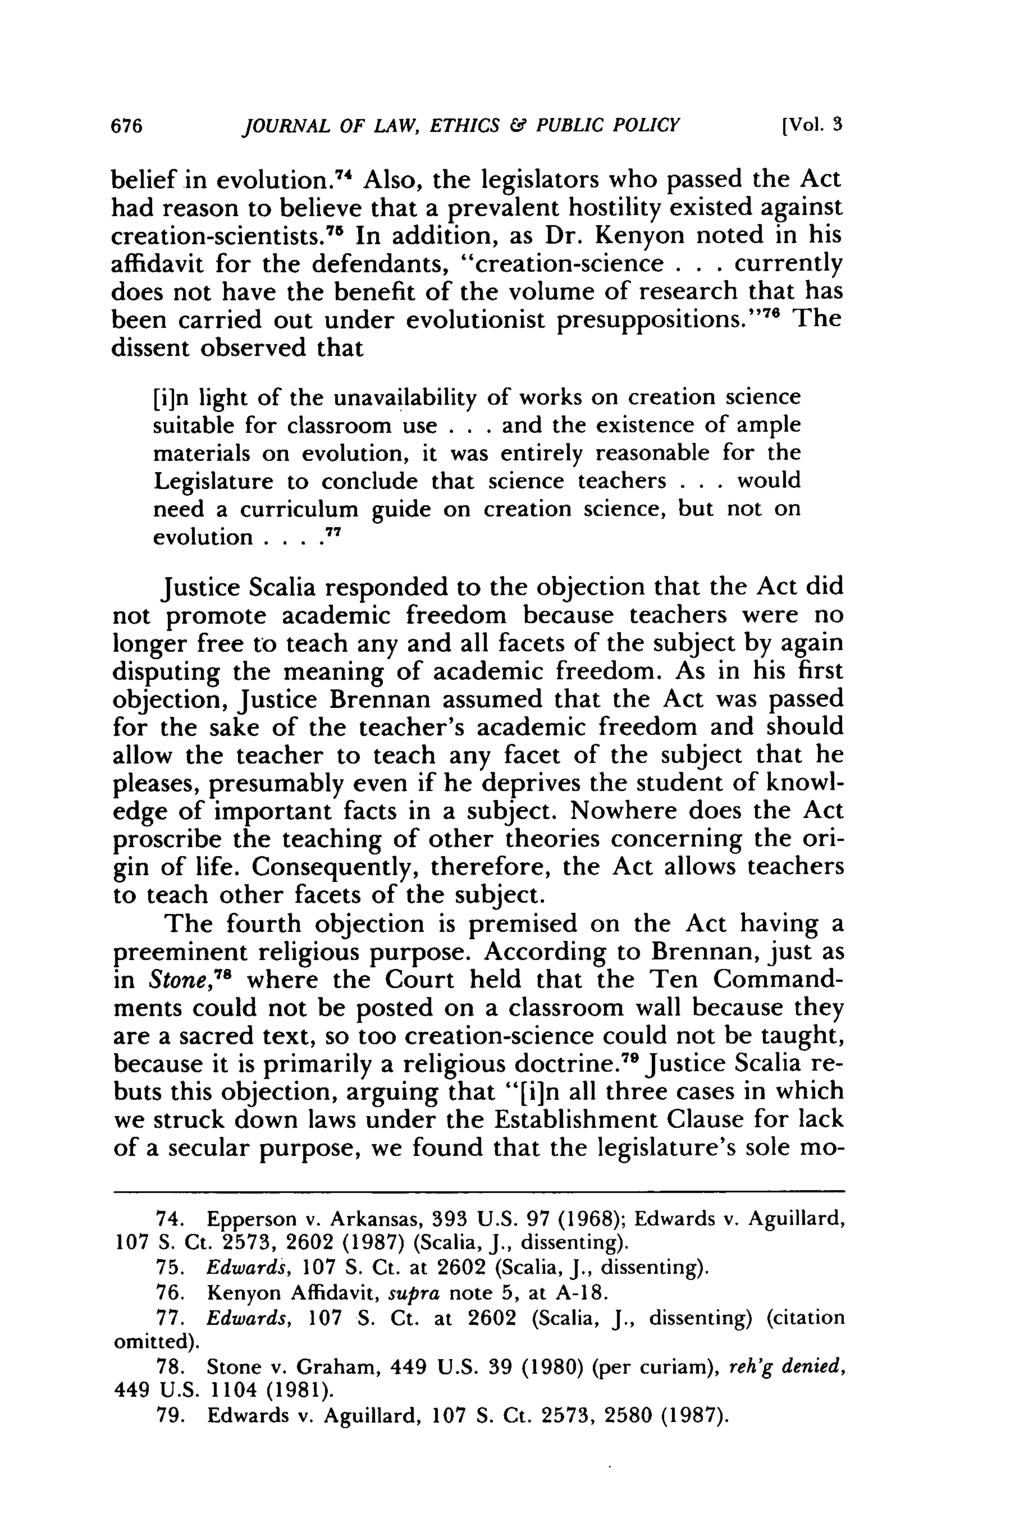 JOURNAL OF LAW, ETHICS & PUBLIC POLICY [Vol. 3 belief in evolution. 4 Also, the legislators who passed the Act had reason to believe that a prevalent hostility existed against creation-scientists.